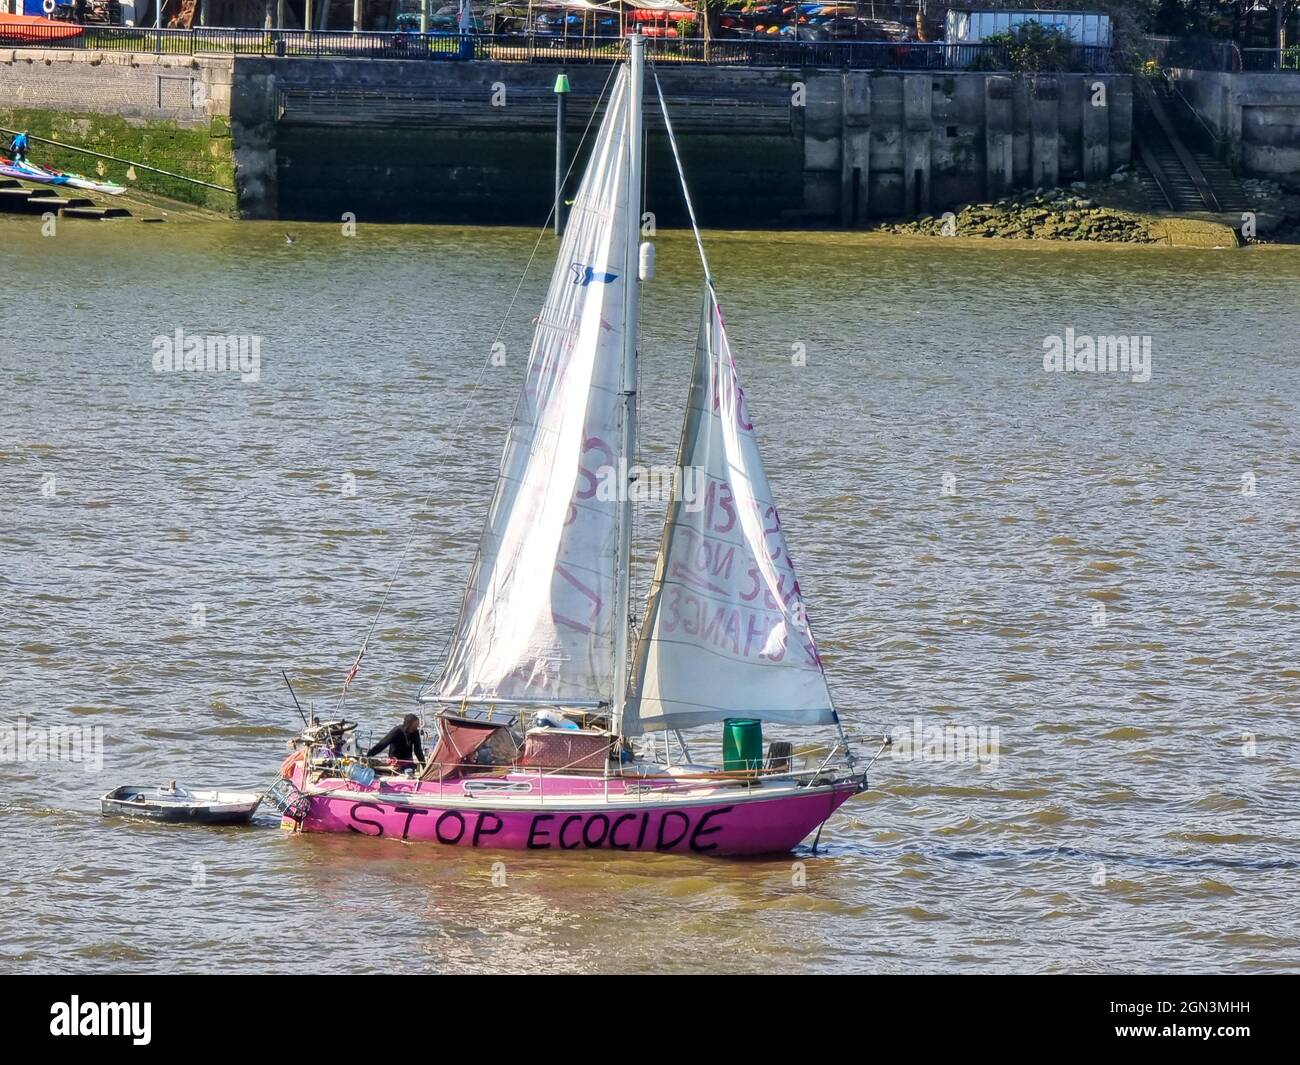 A pink sail boat adorned with environmental messages such as stop ecocide Stock Photo